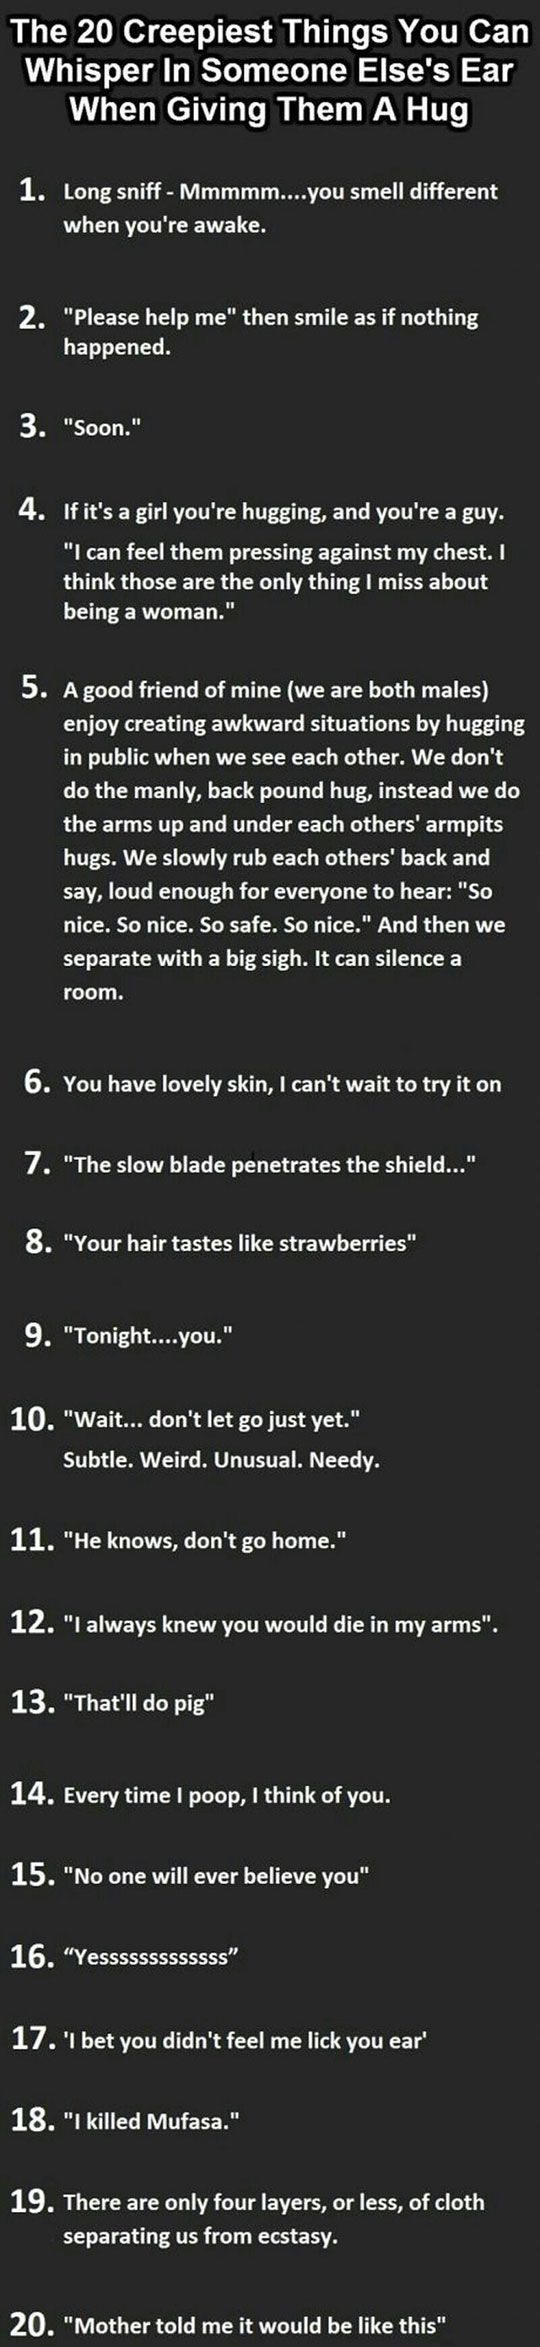 The 20 creepiest things you can whisper in someone's ear